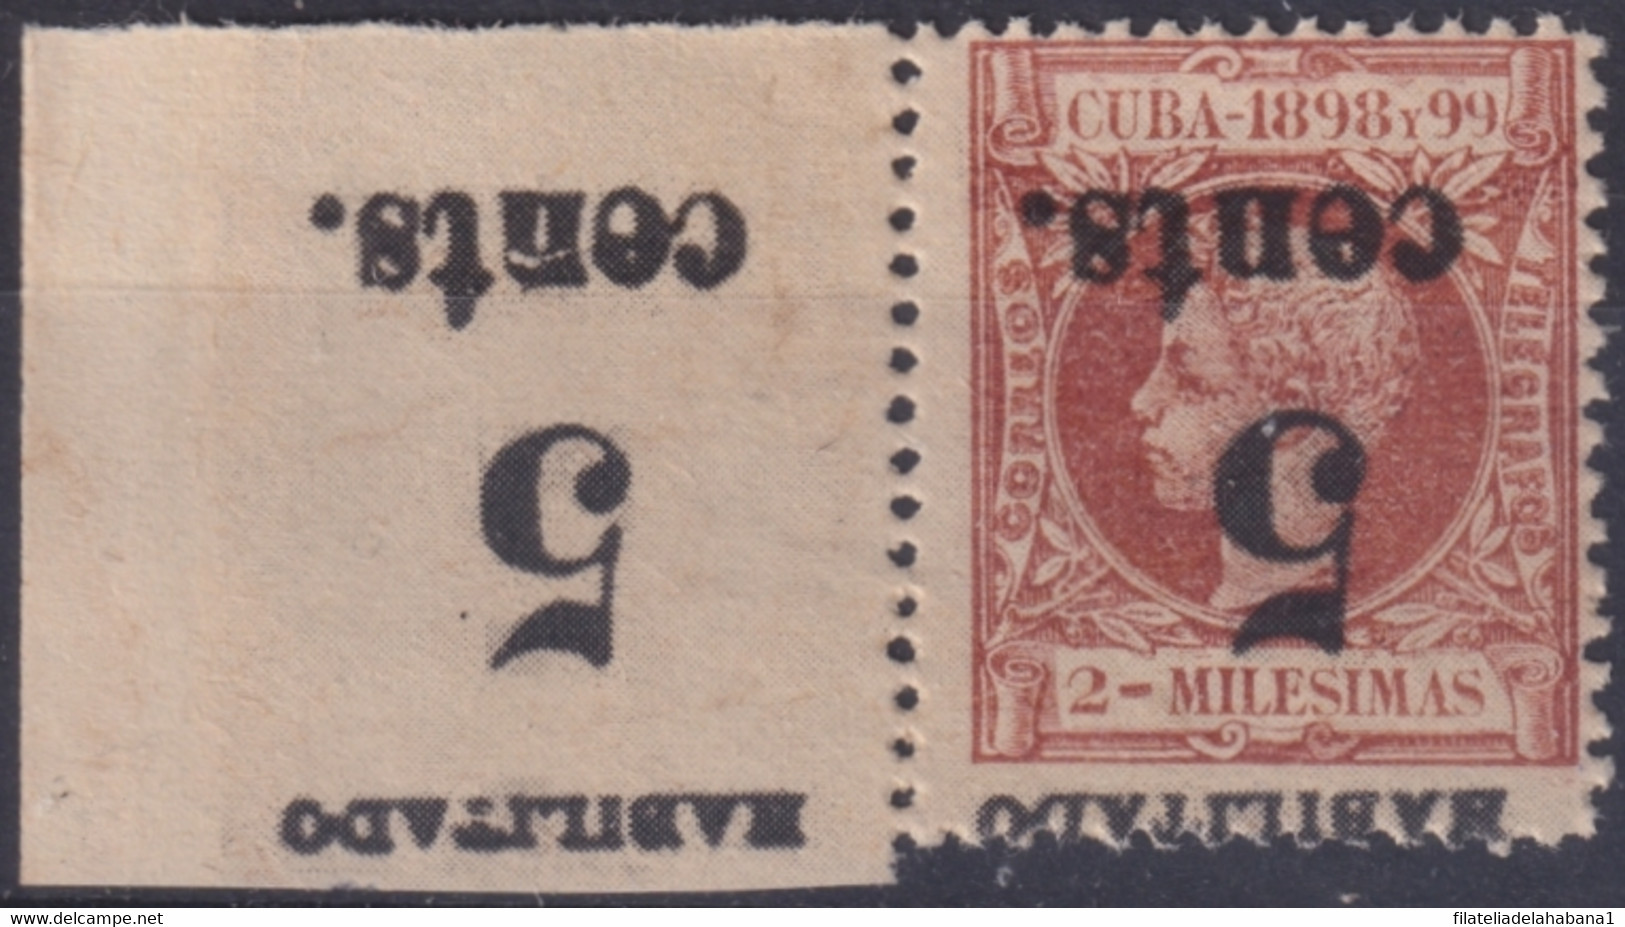 1899-484 CUBA 1899 5c S. 2m US OCCUPATION 2th ISSUE INVERTED PHILATELIC FORGERY. - Neufs